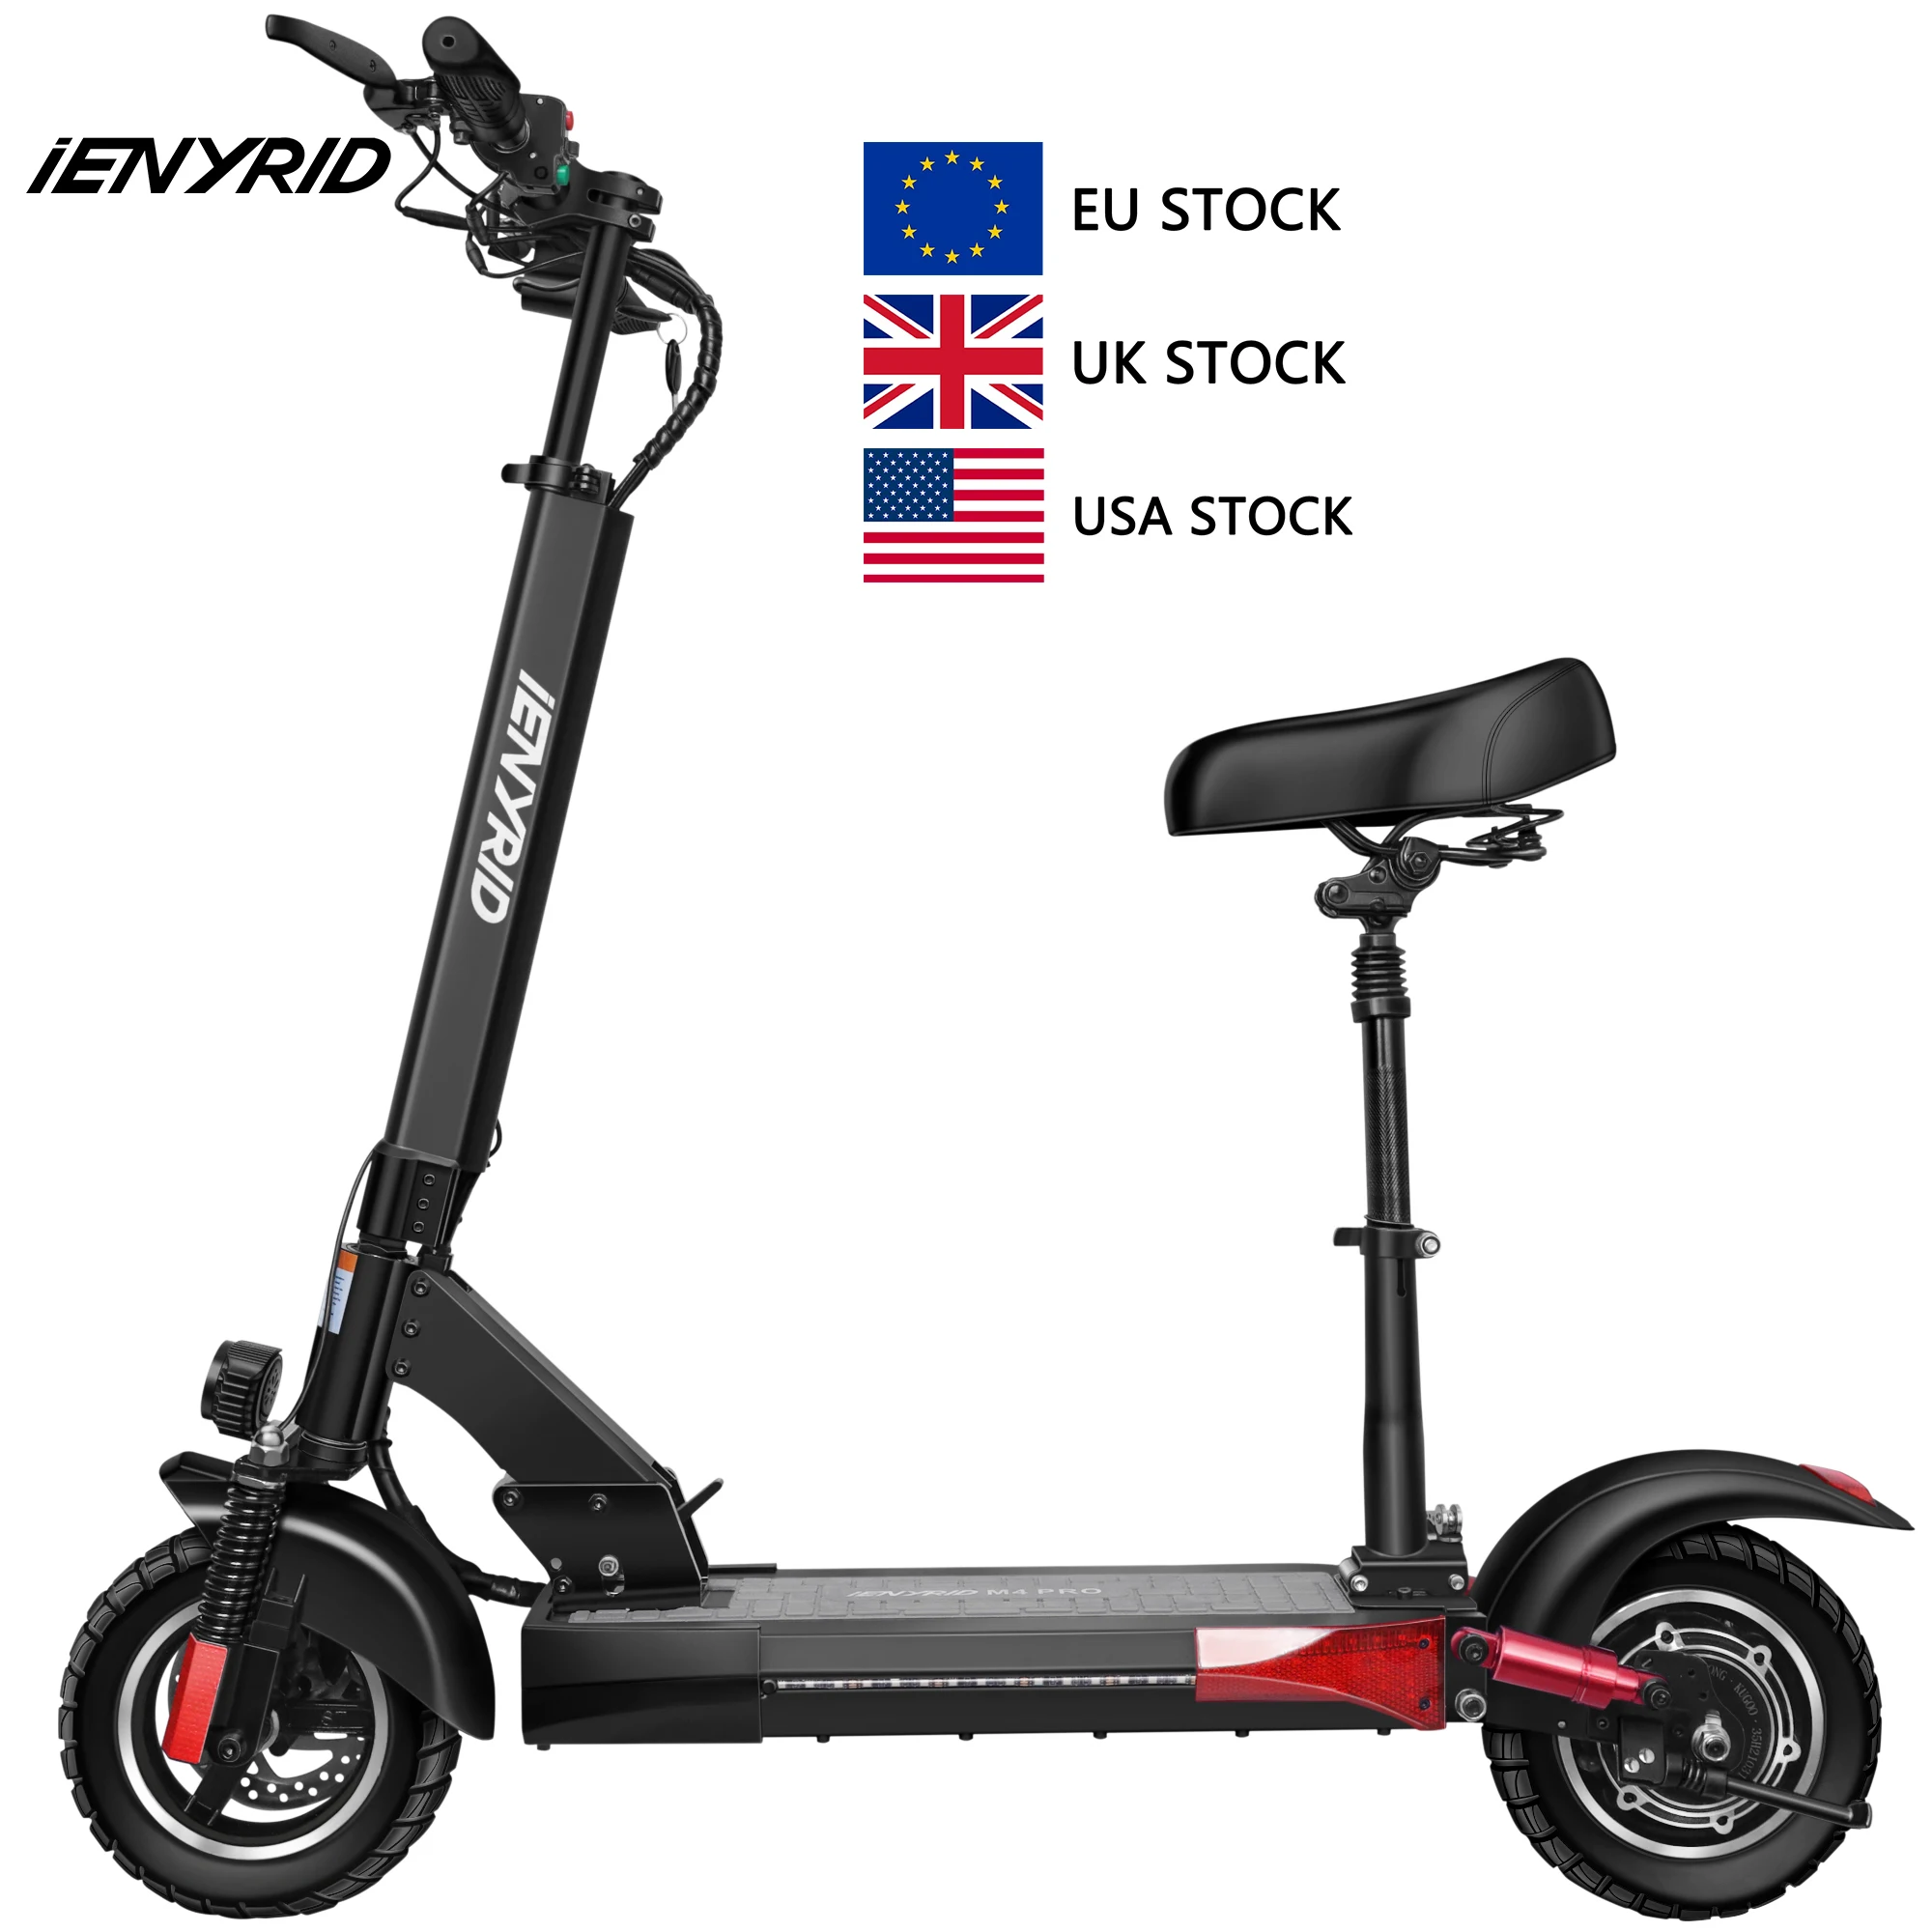 CE FCC ROHS Certification Overseas Warehouses 45KM/H high speed electric scooter 48V 500W escooter foot kick scooters with seat